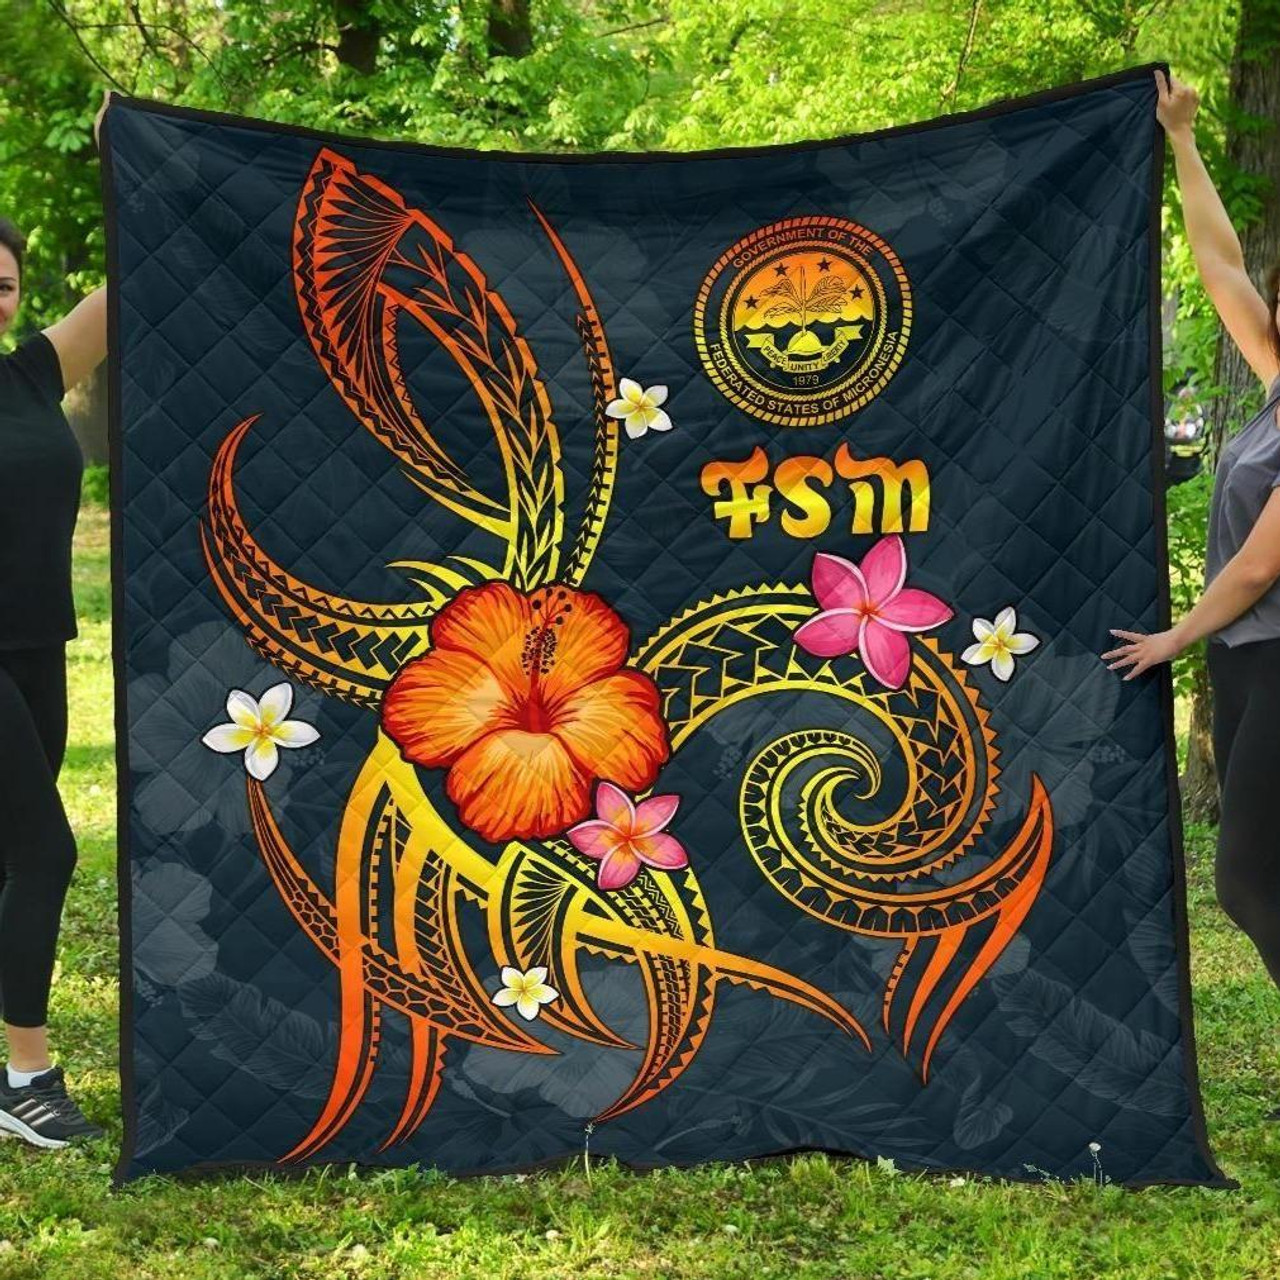 Federated States of Micronesia Polynesian Premium Quilt - Legend of FSM (Blue) 1